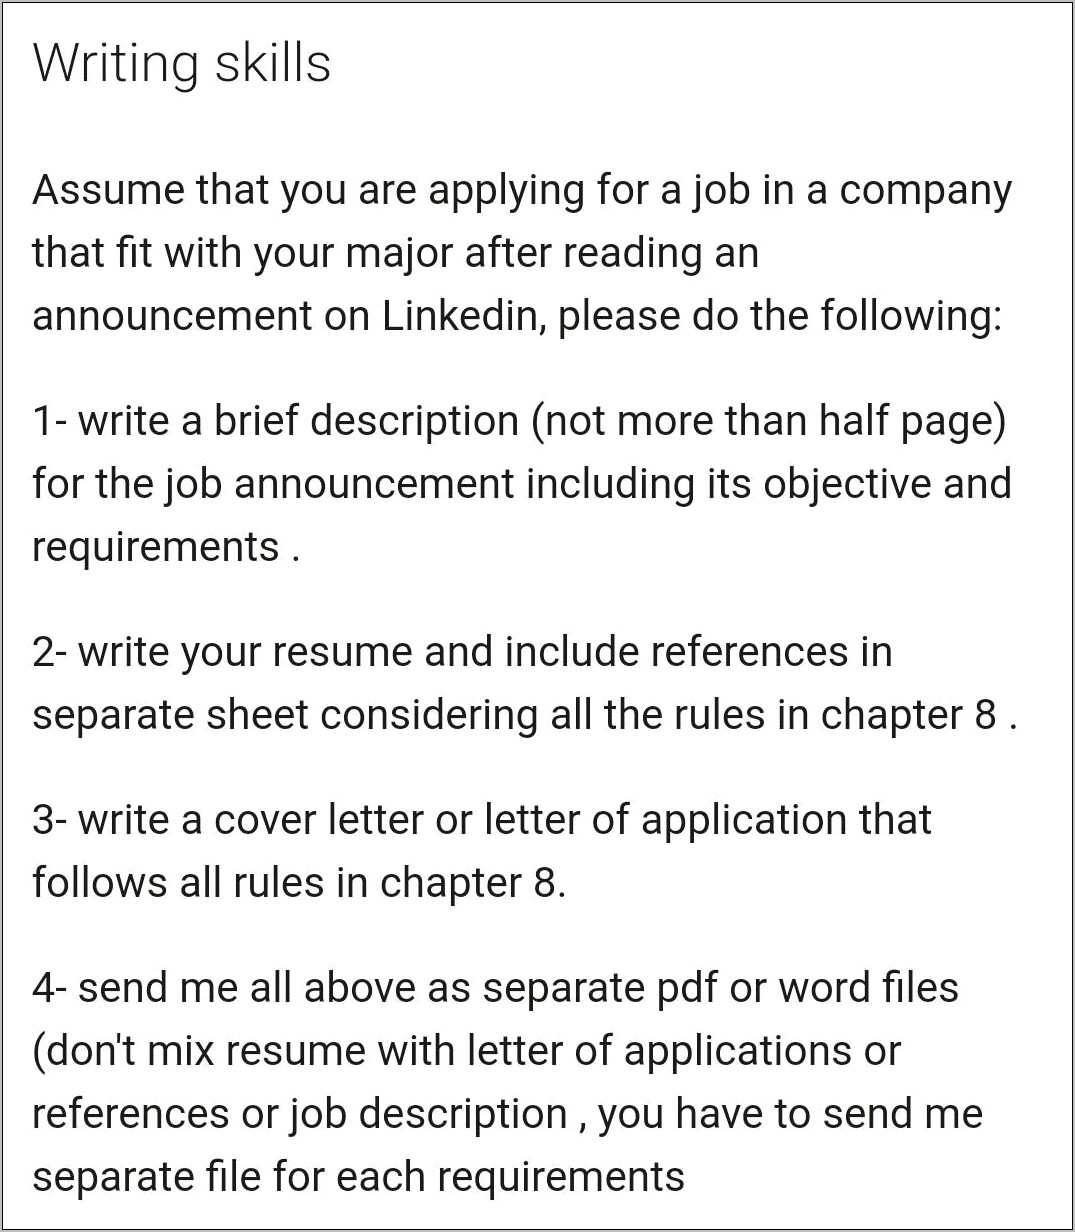 Separate Cover Letter Or Combine With Resume